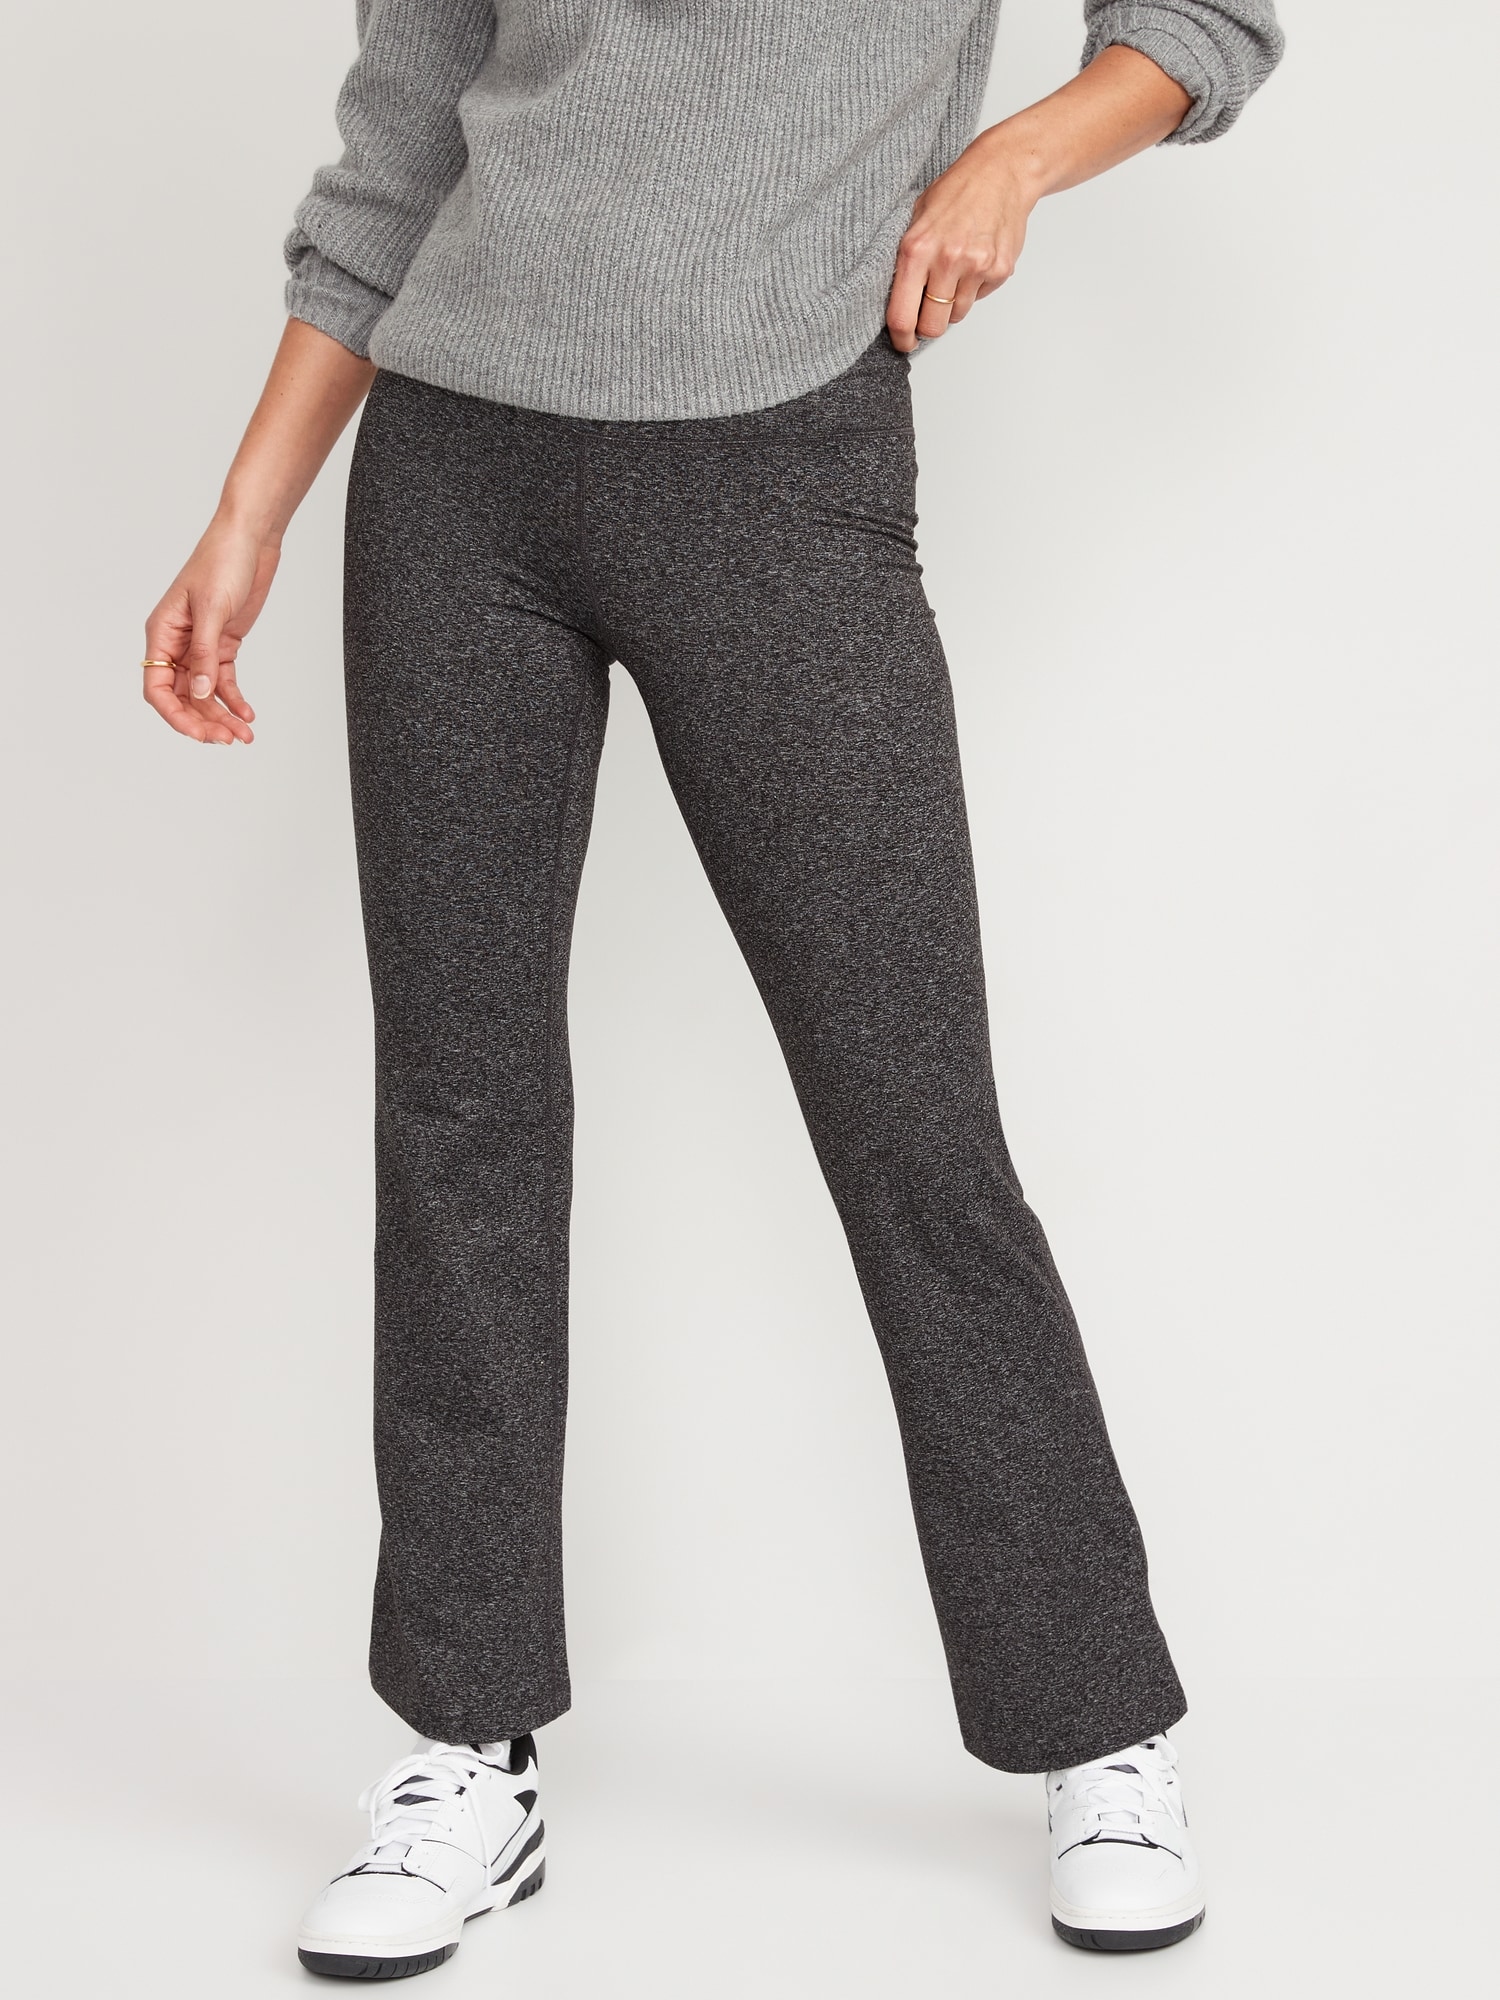 Old Navy, Pants & Jumpsuits, Old Navy Cozecore High Waisted Leggings